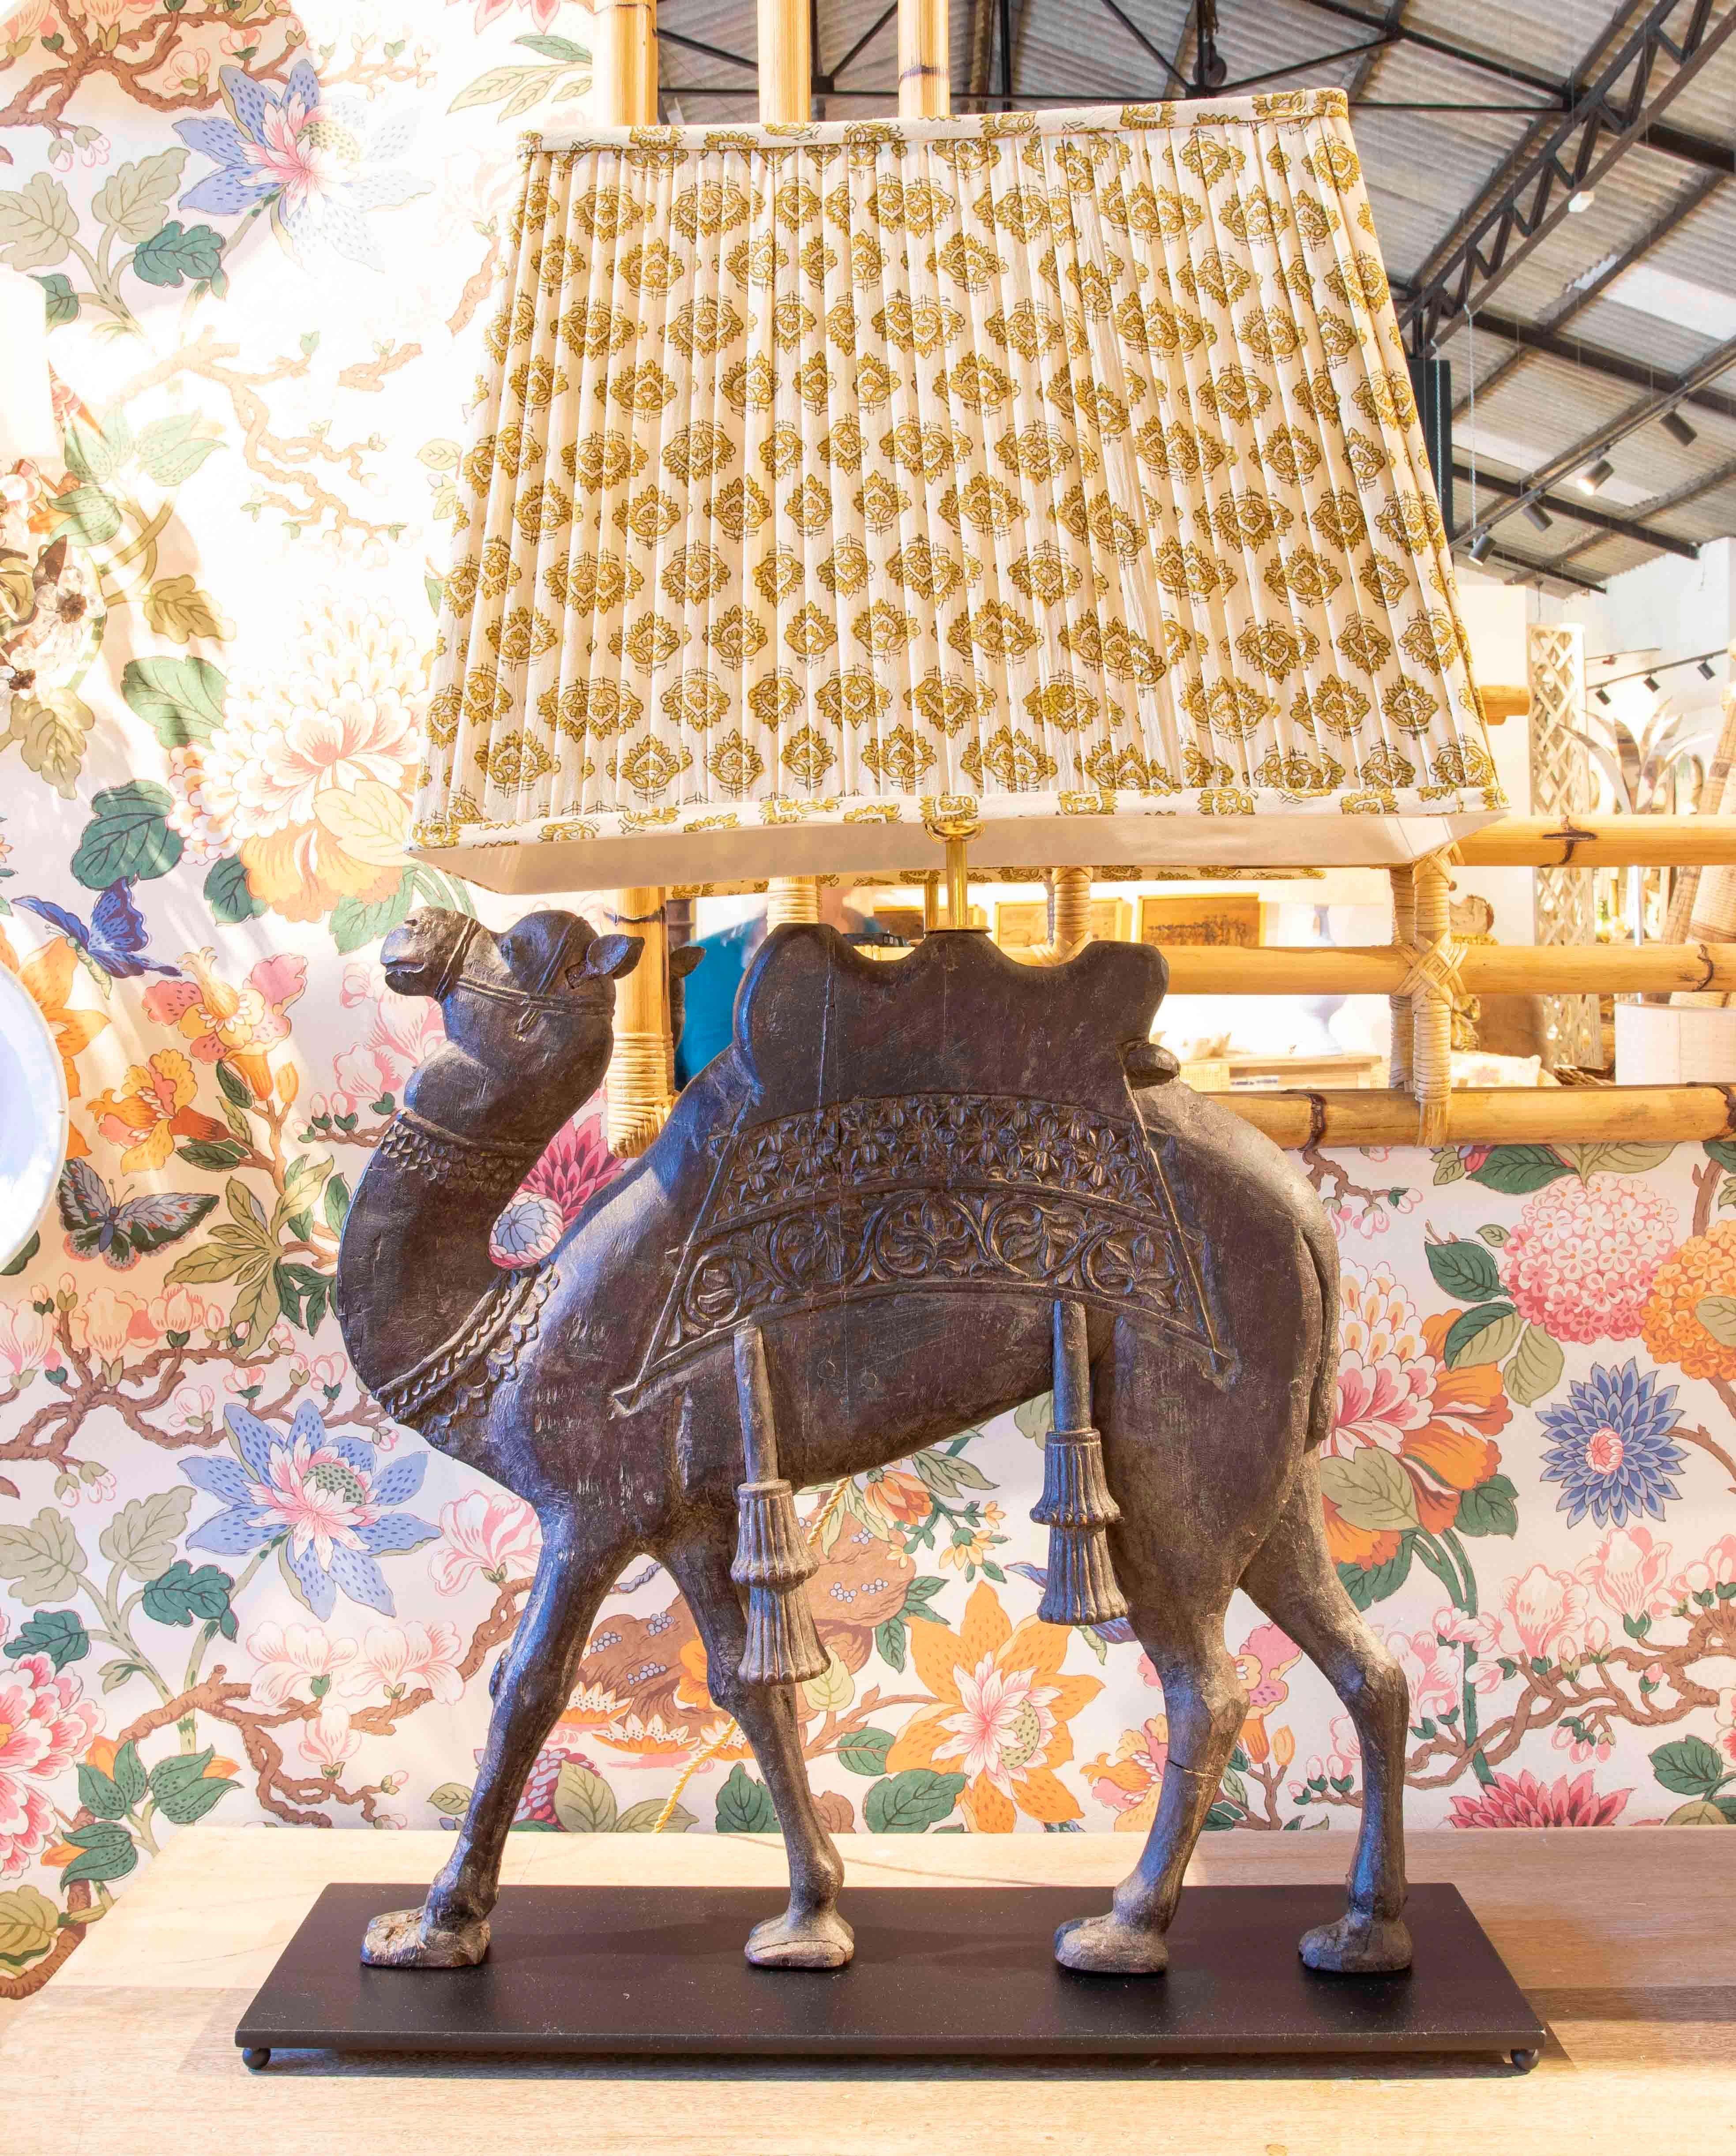 Pair of Lamps with Carved Wooden Camel Foot on Both Sides
The size includes the lampshade